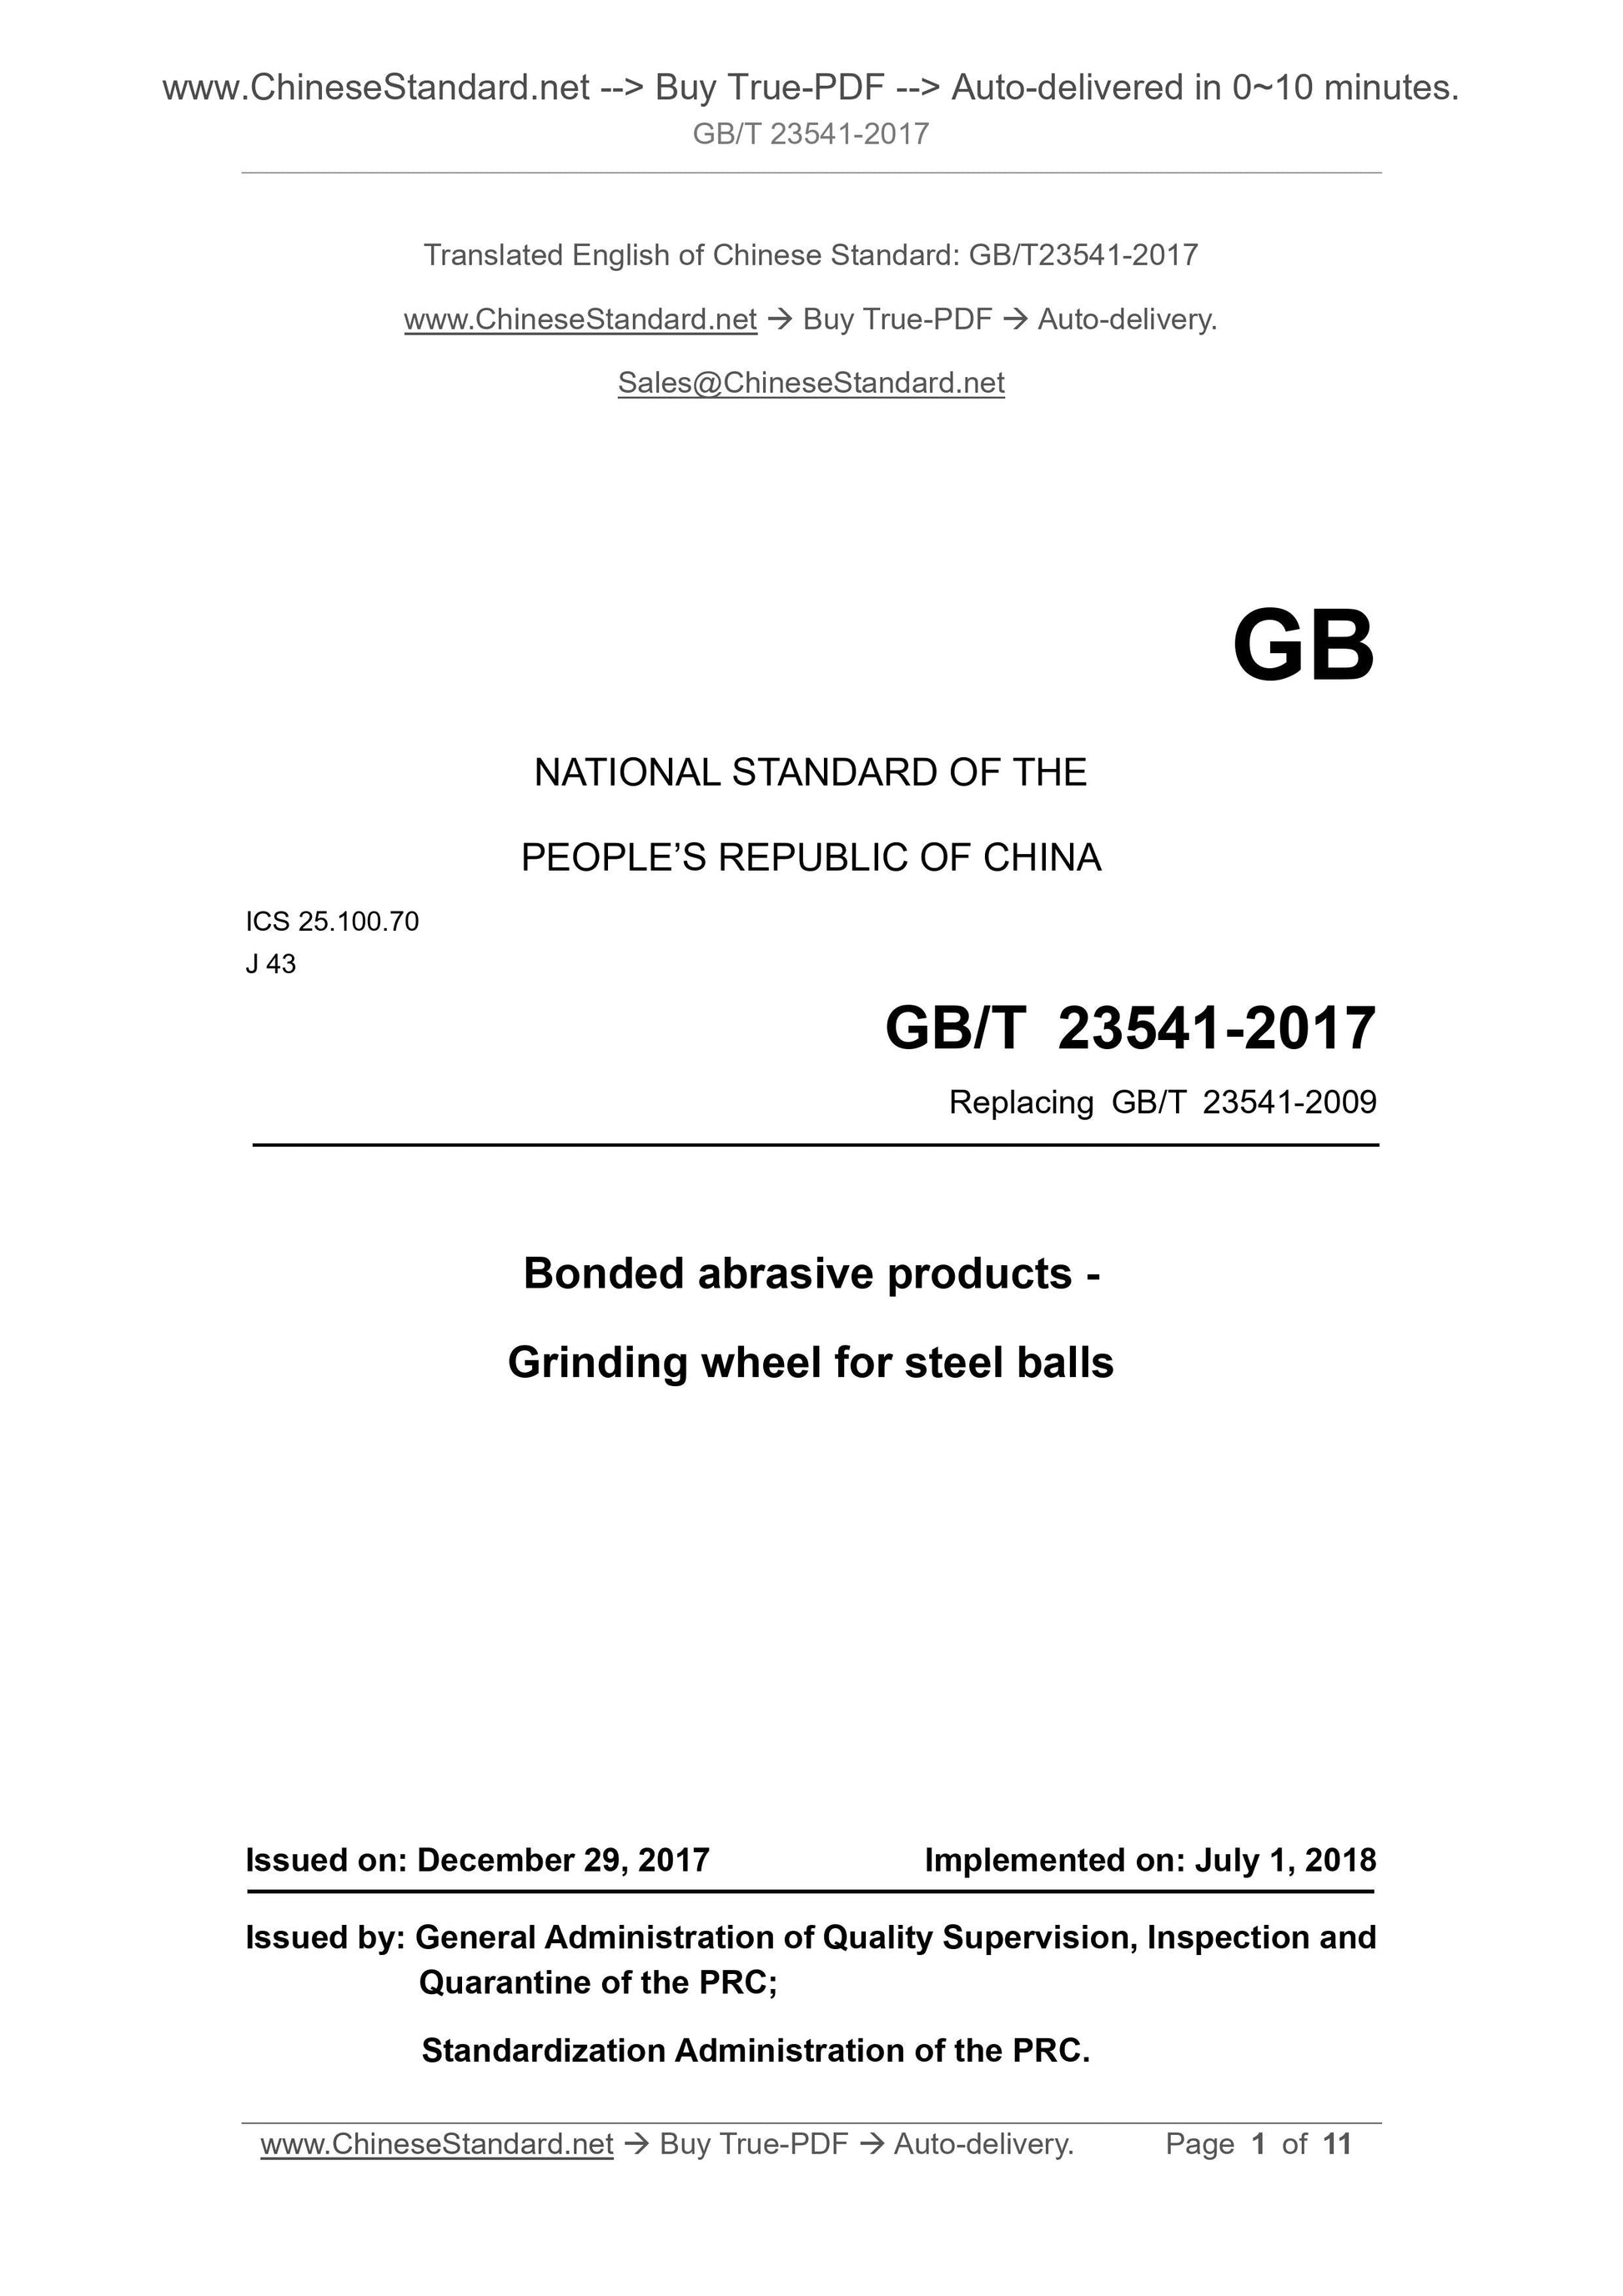 GB/T 23541-2017 Page 1